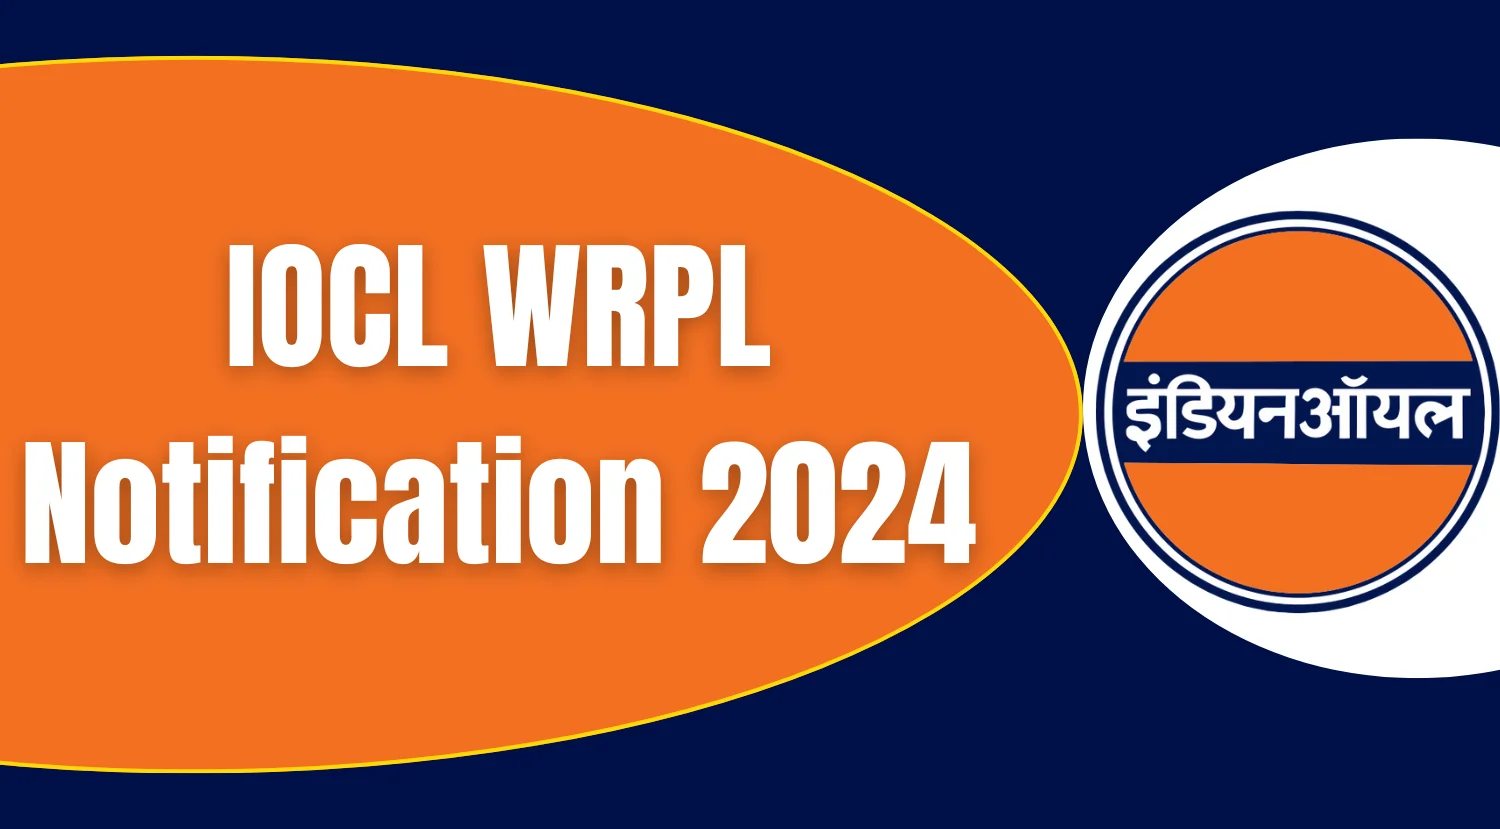 IOCL WPRL Security Chief Recruitment 2024 Notification